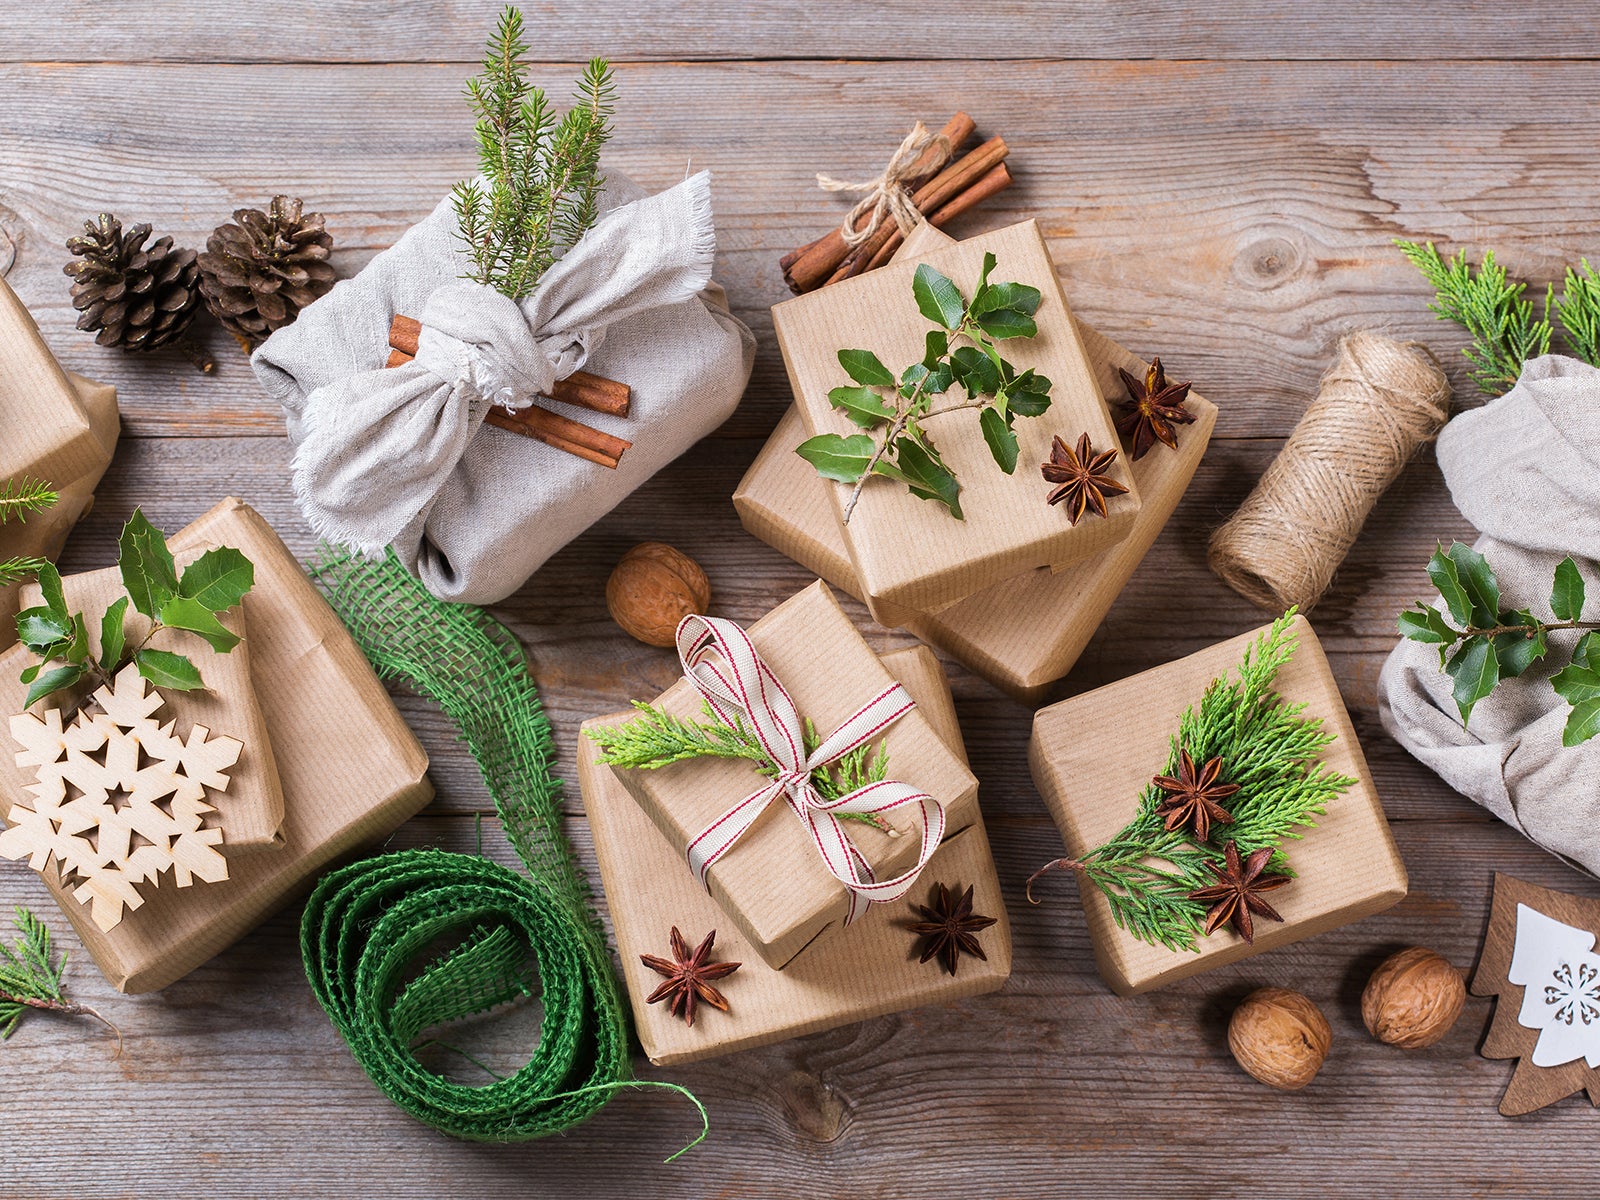 Christmas Gift Wrap Ideas: 12 Ways To Use Natural Materials